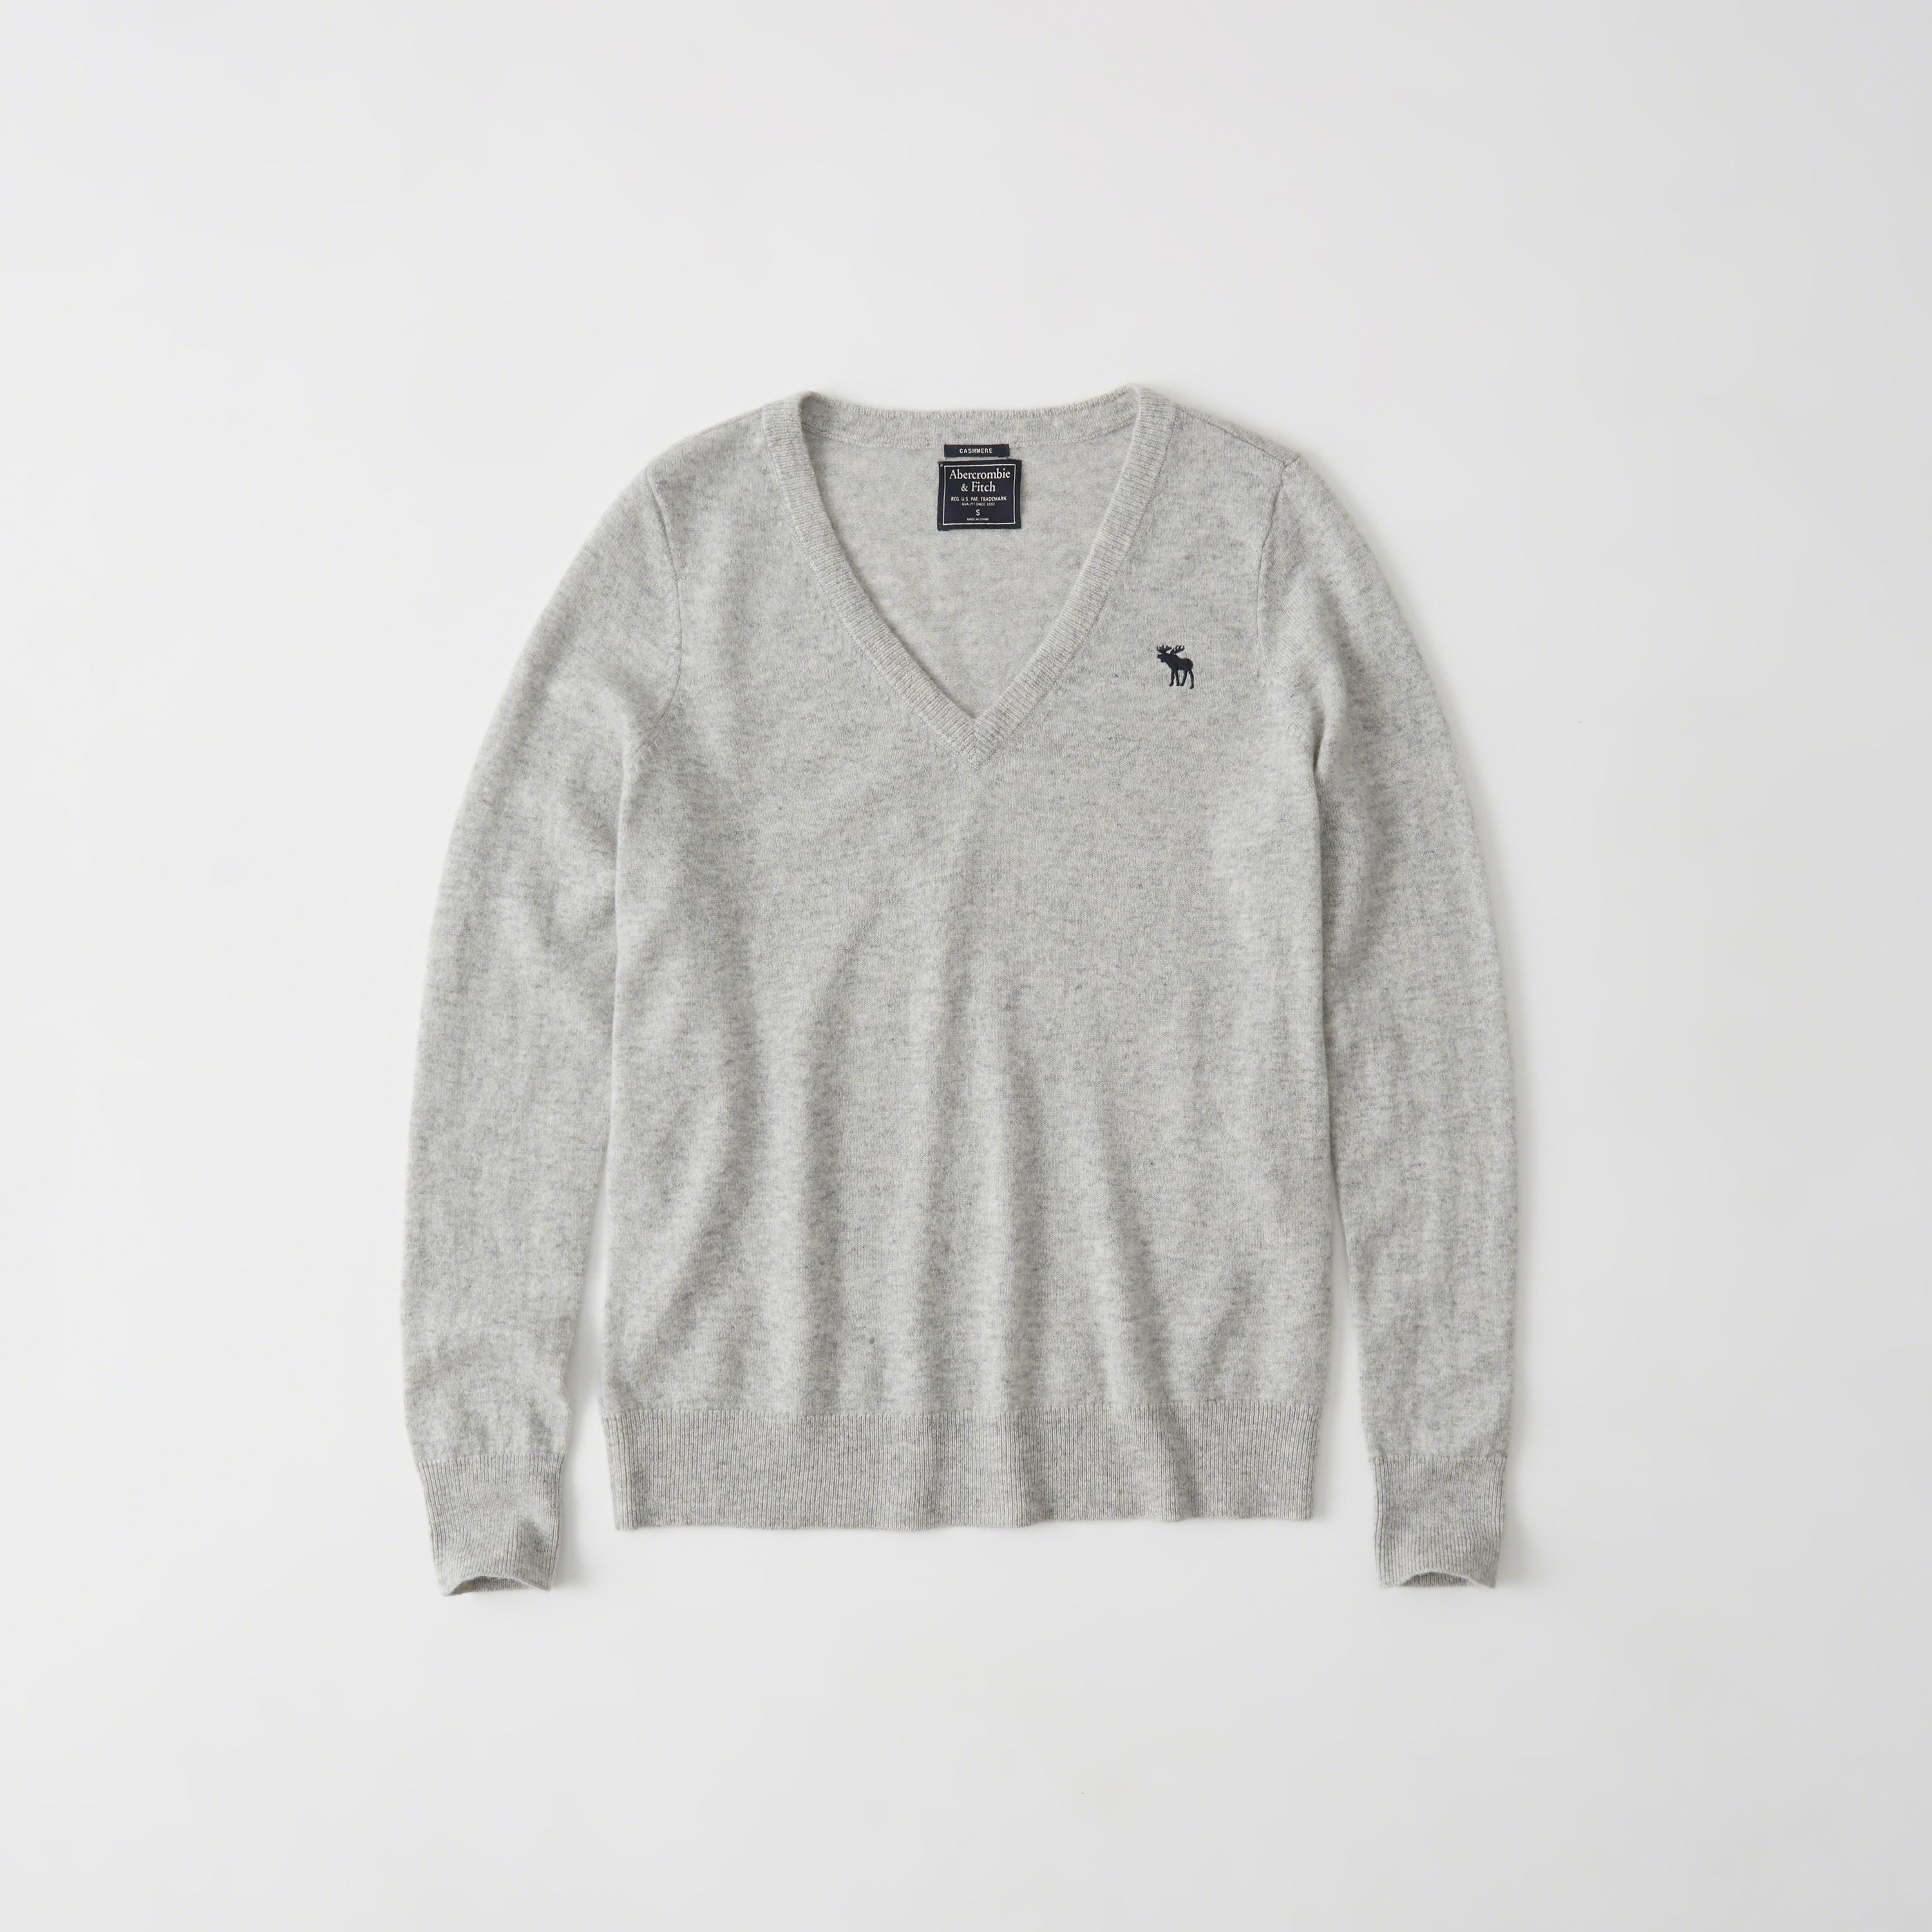 Lyst - Abercrombie & Fitch Cashmere Icon V-neck Sweater in Gray for Men